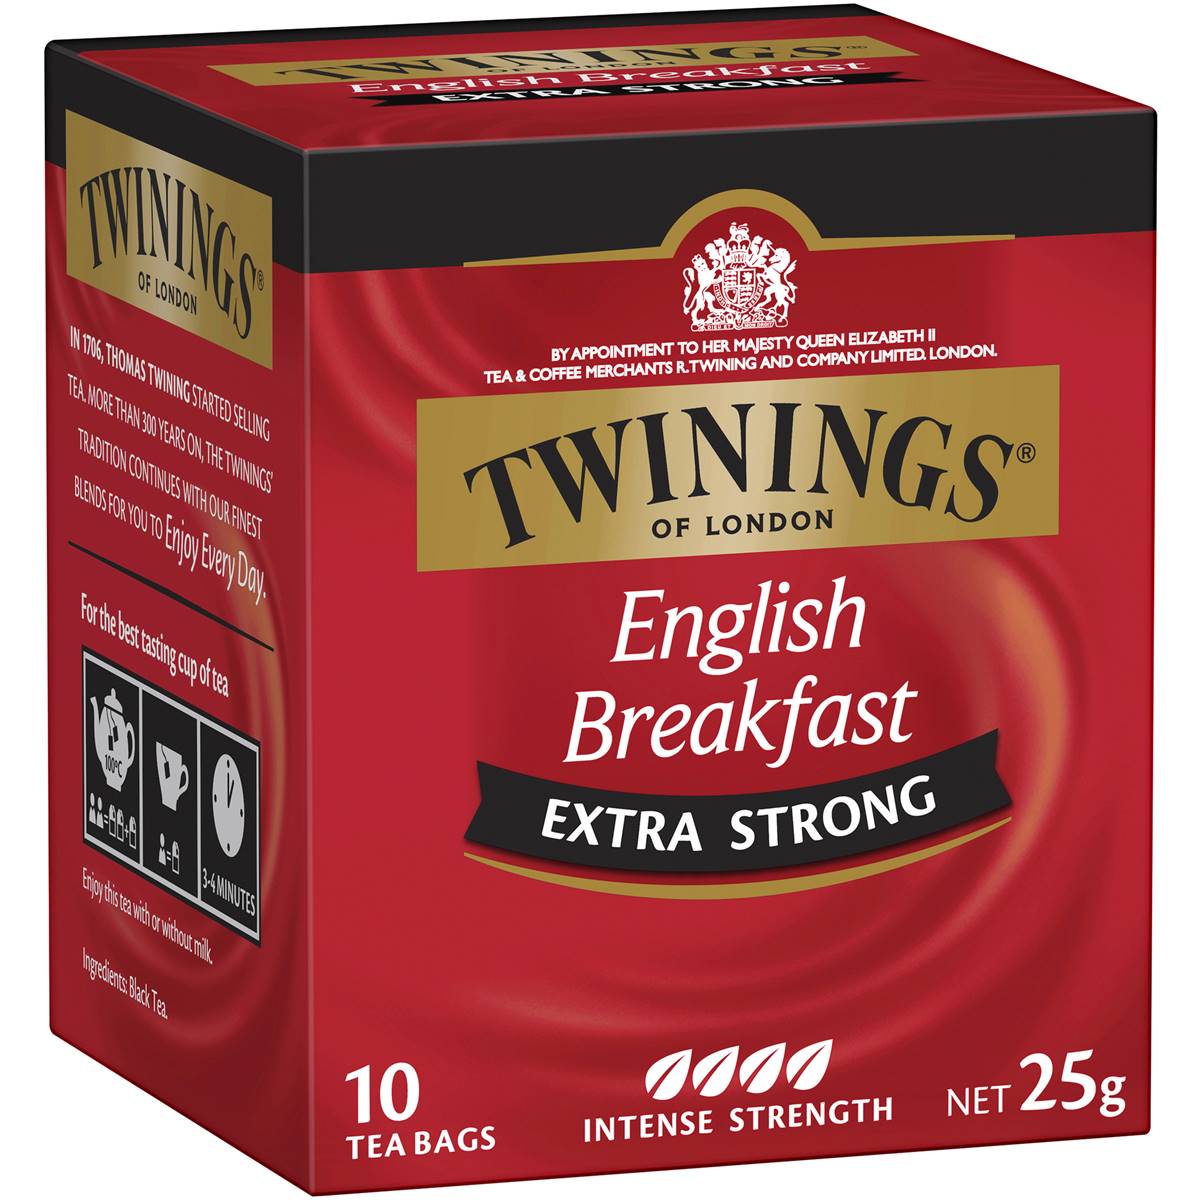 Twinings English Breakfast Extra Strong Tea Bags 10 Pack